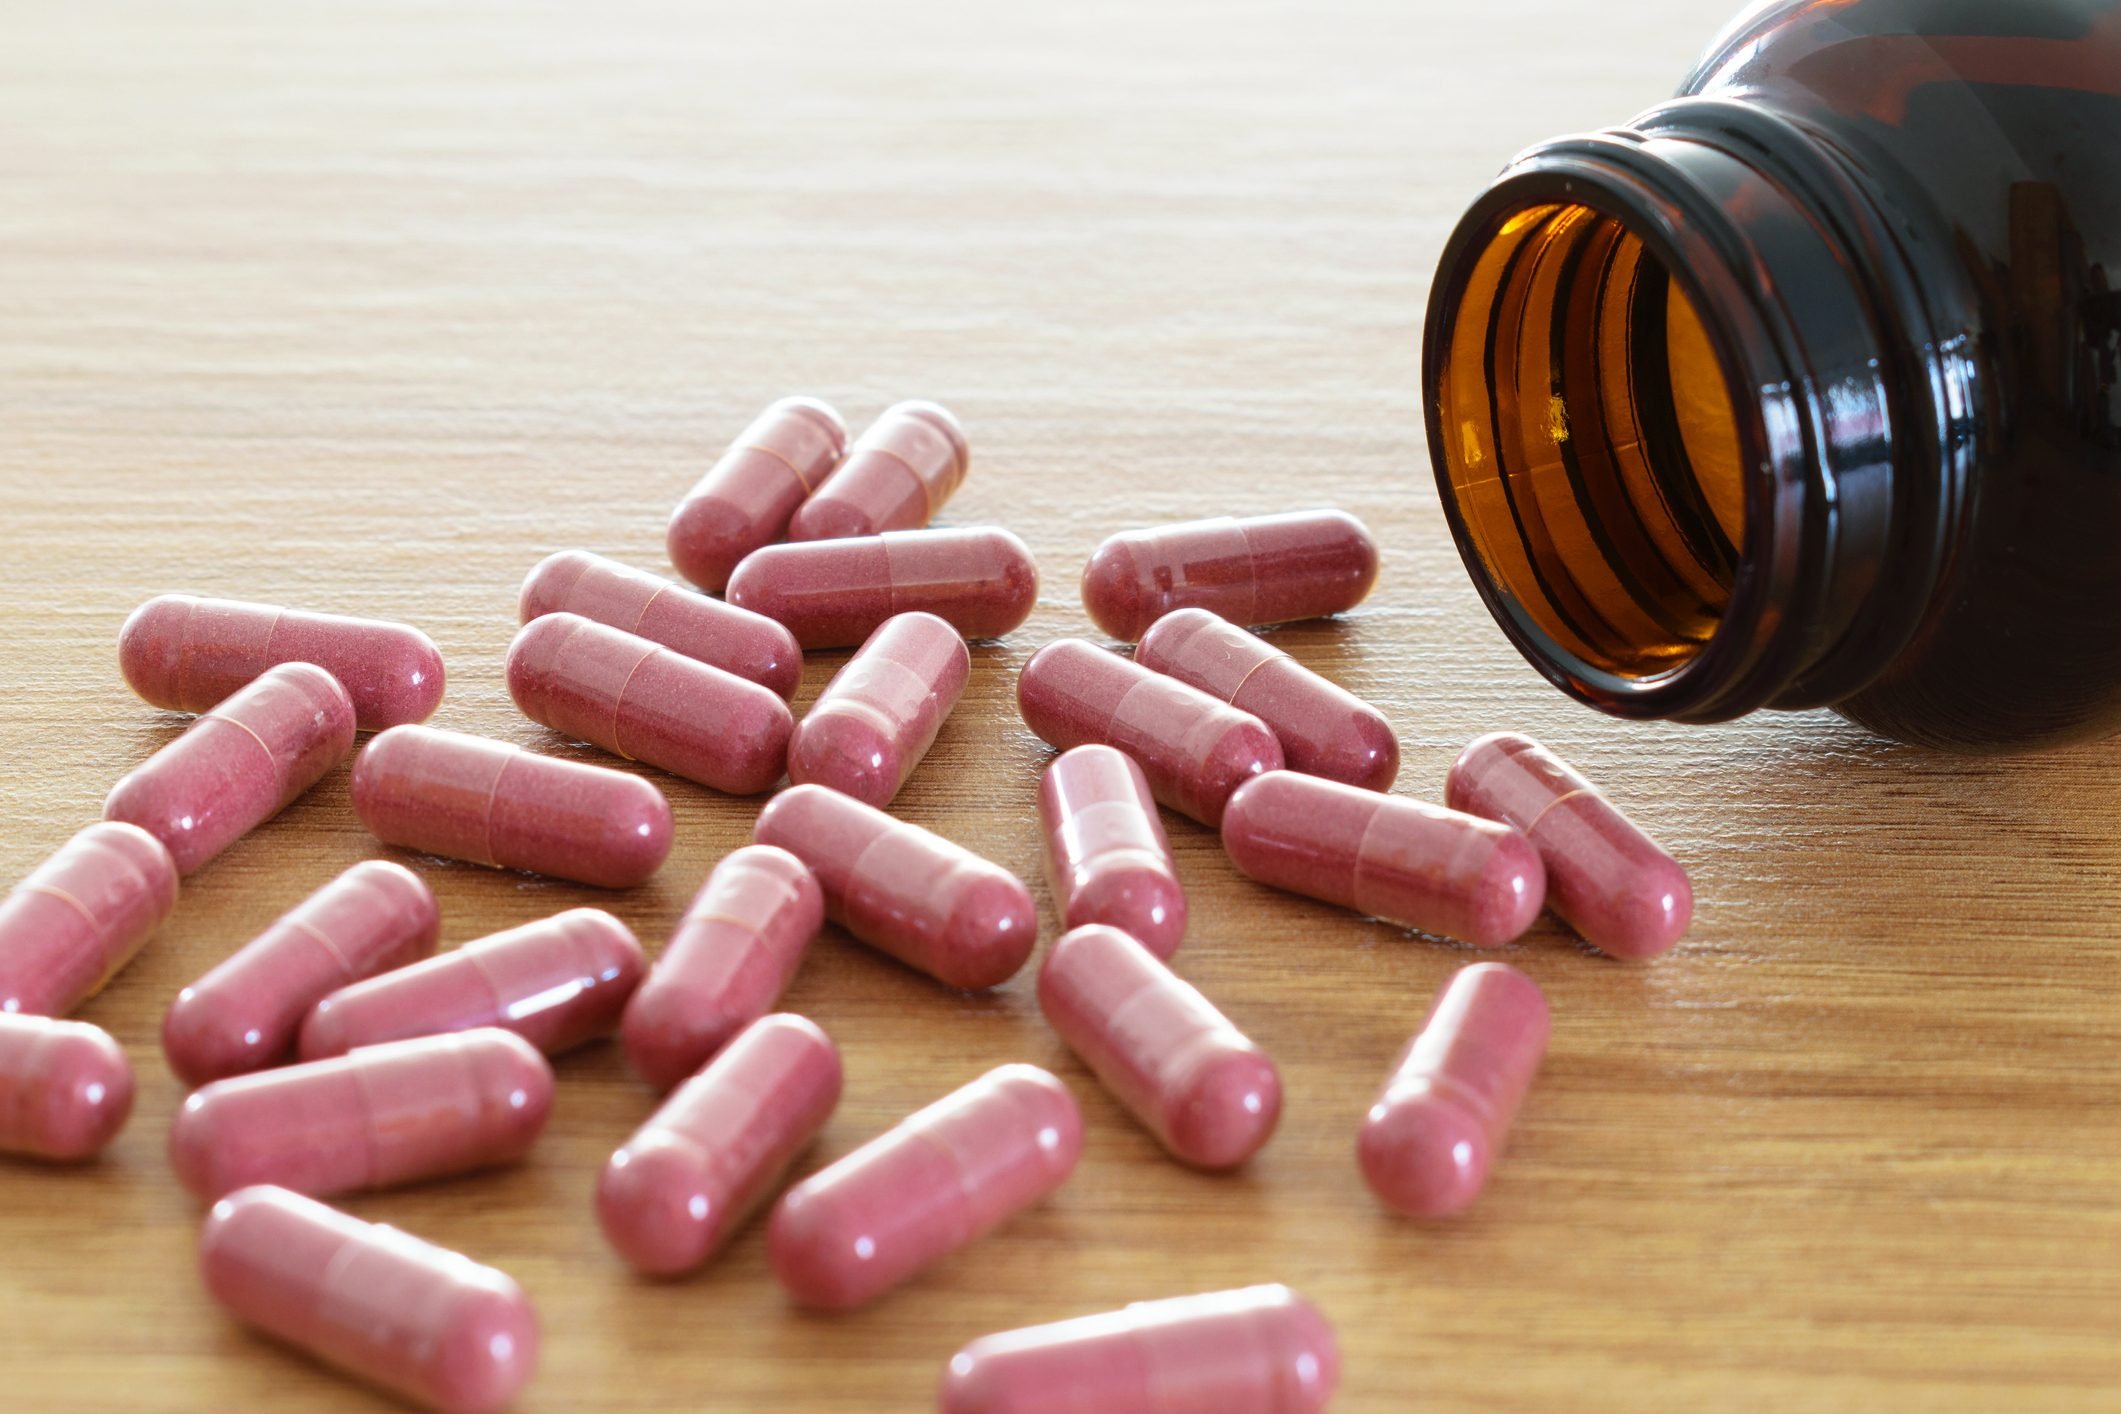 Should You Take Cranberry Pills for UTI?